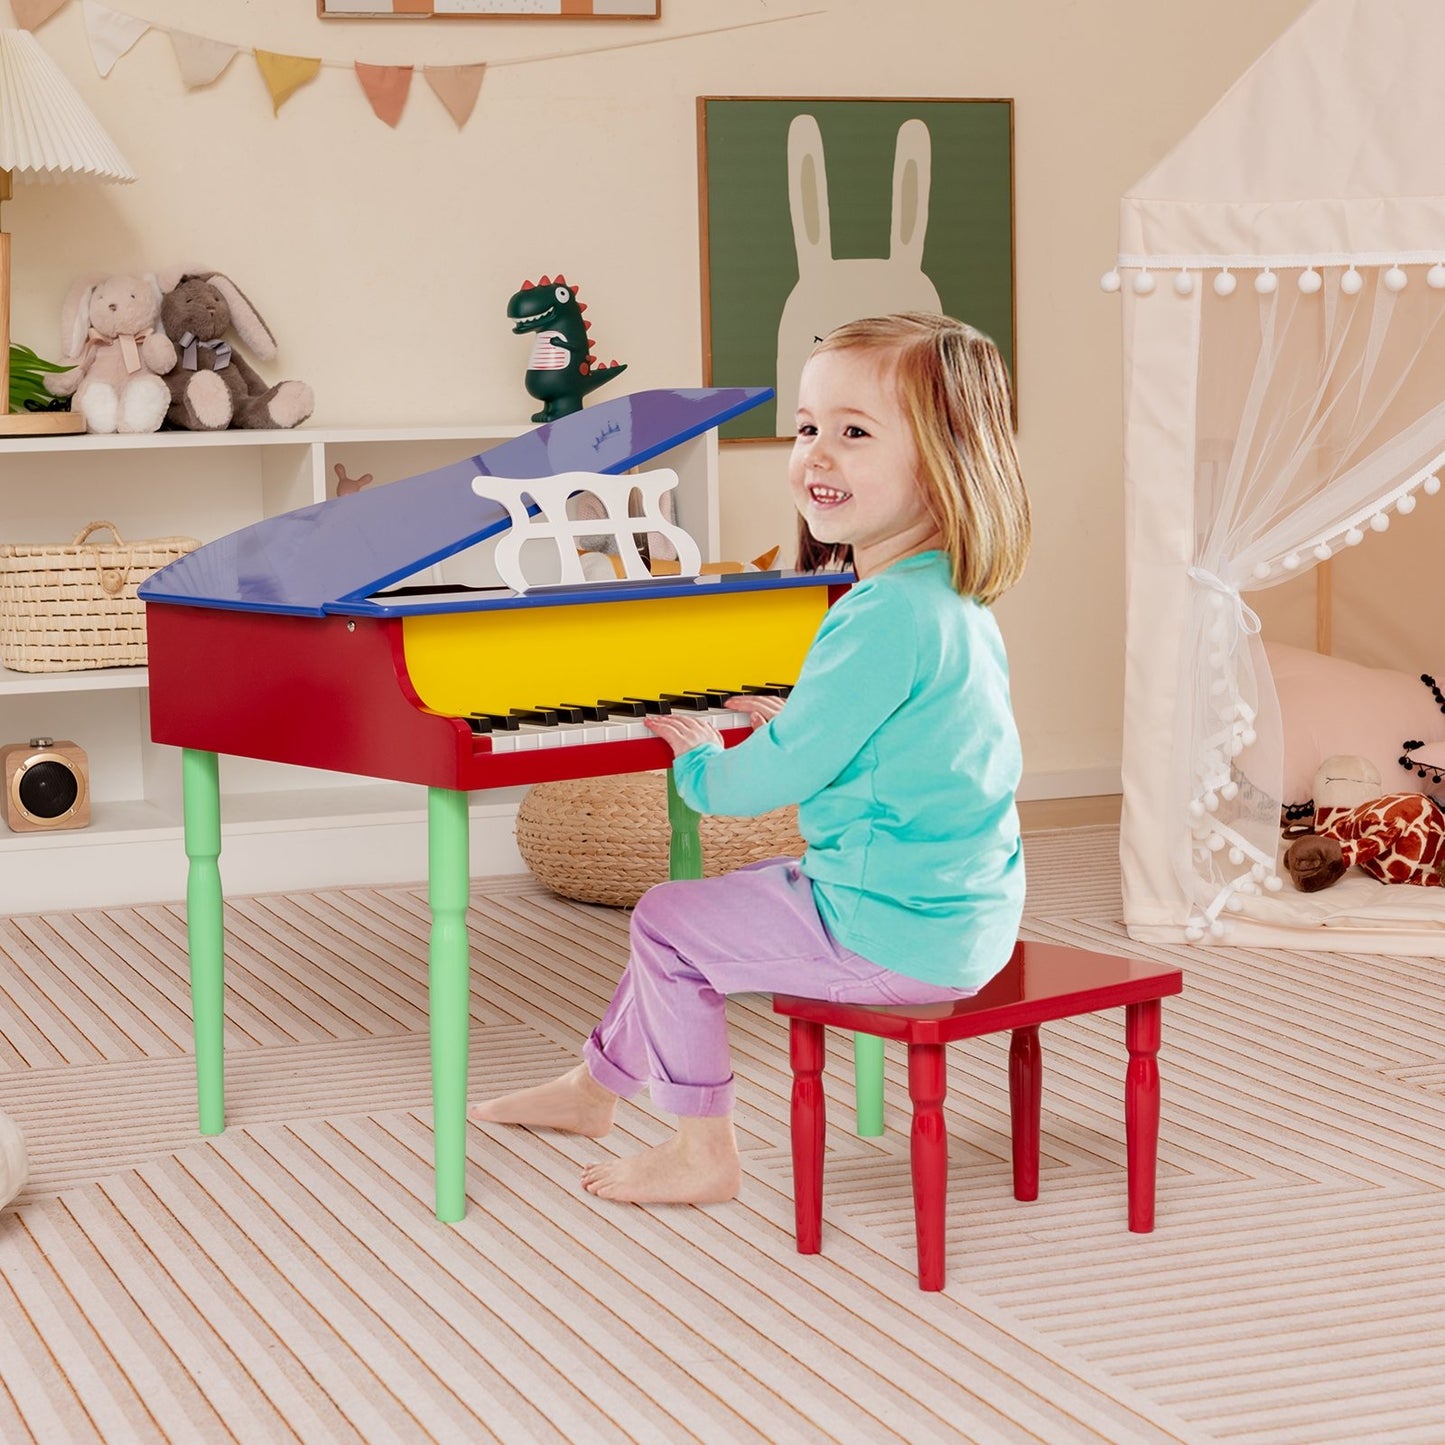 30-Key Wood Toy Kids Grand Piano with Bench and Music Rack, Multicolor